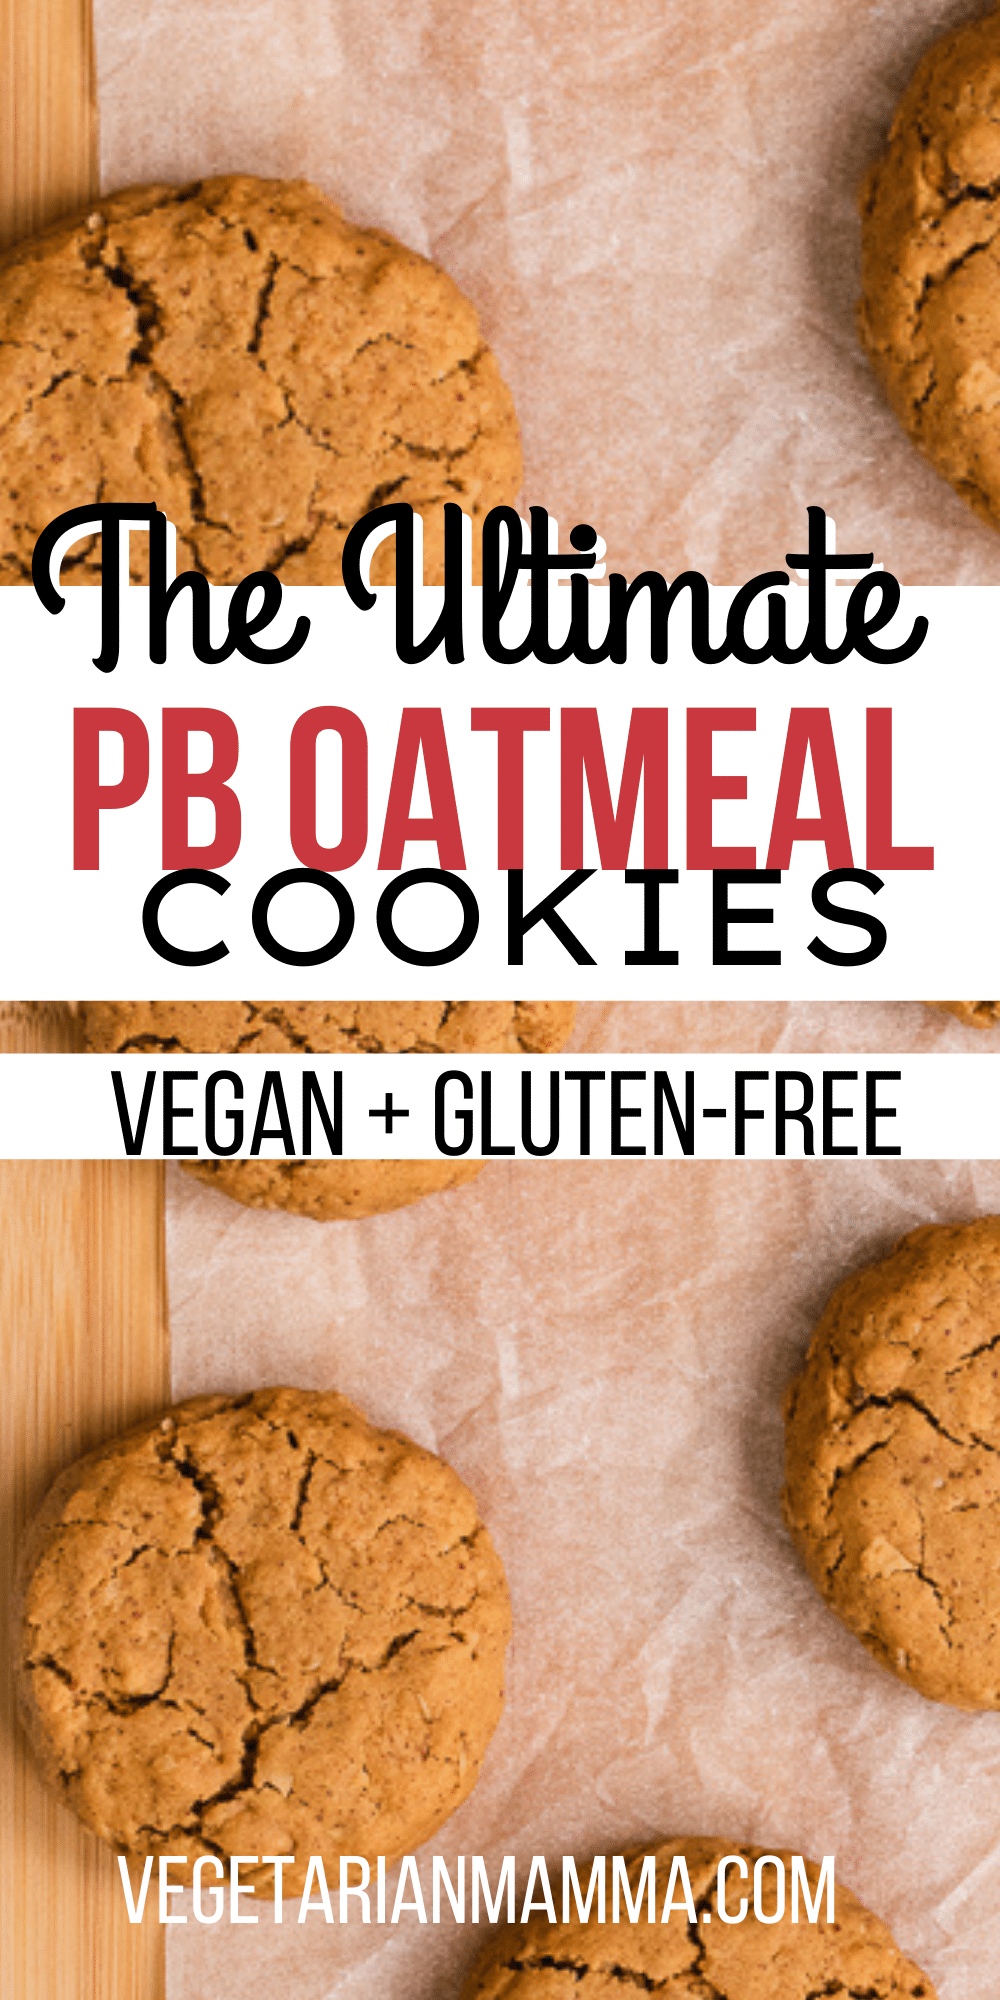 These Vegan Peanut Butter Oatmeal Cookies are so moist and gluten free, too! Made with rolled oats, natural peanut butter, and gluten-free flour, these are the easiest cookies to make without a mixer.